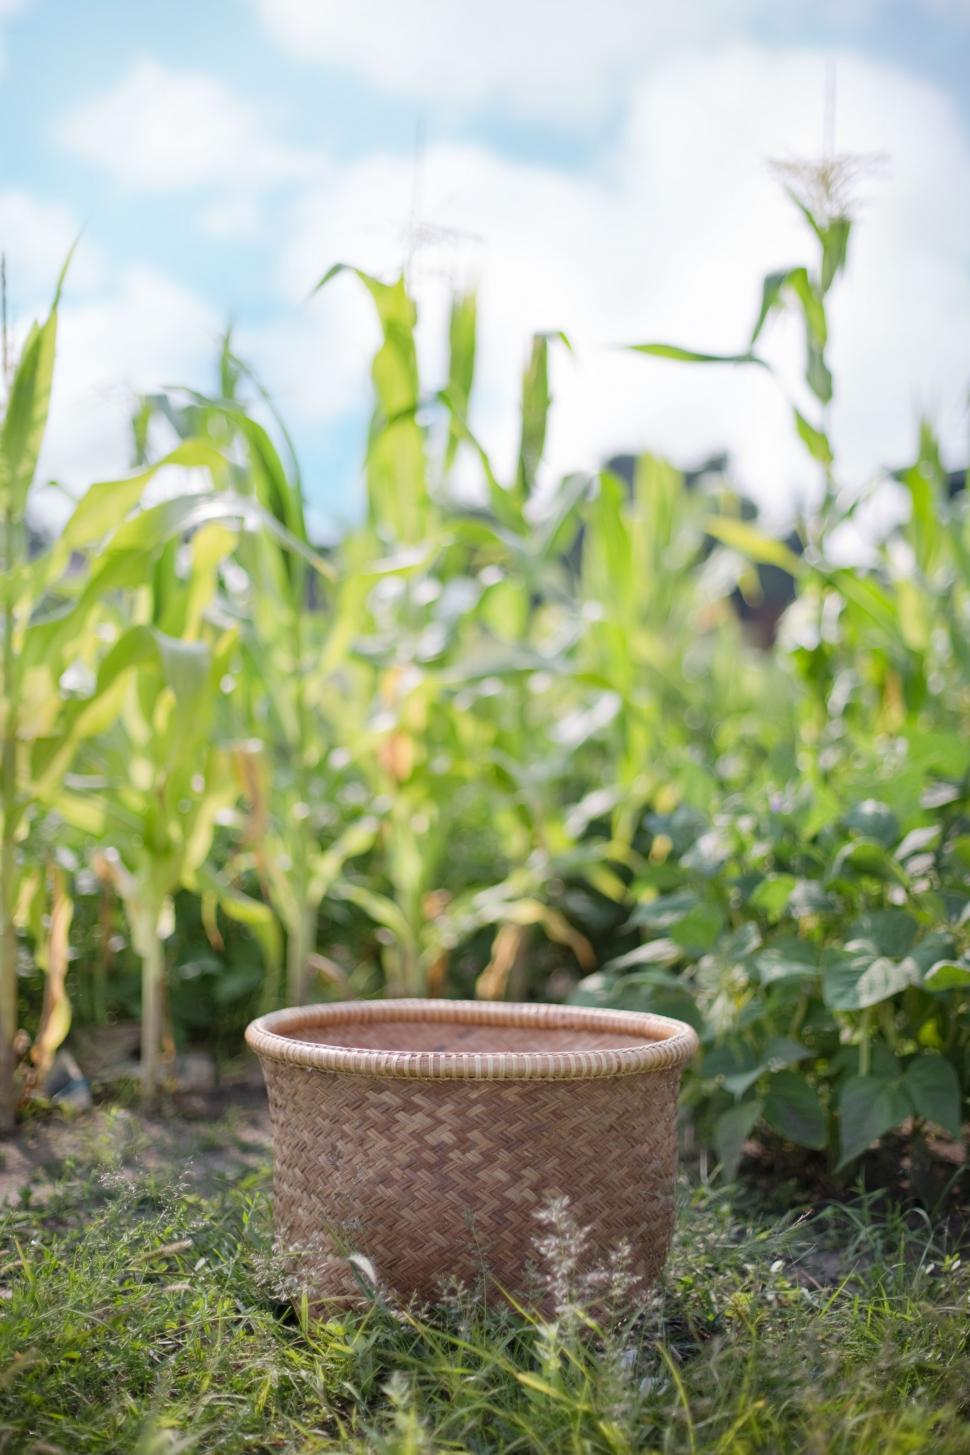 Free Image of Wicker Basket in agriculture field 